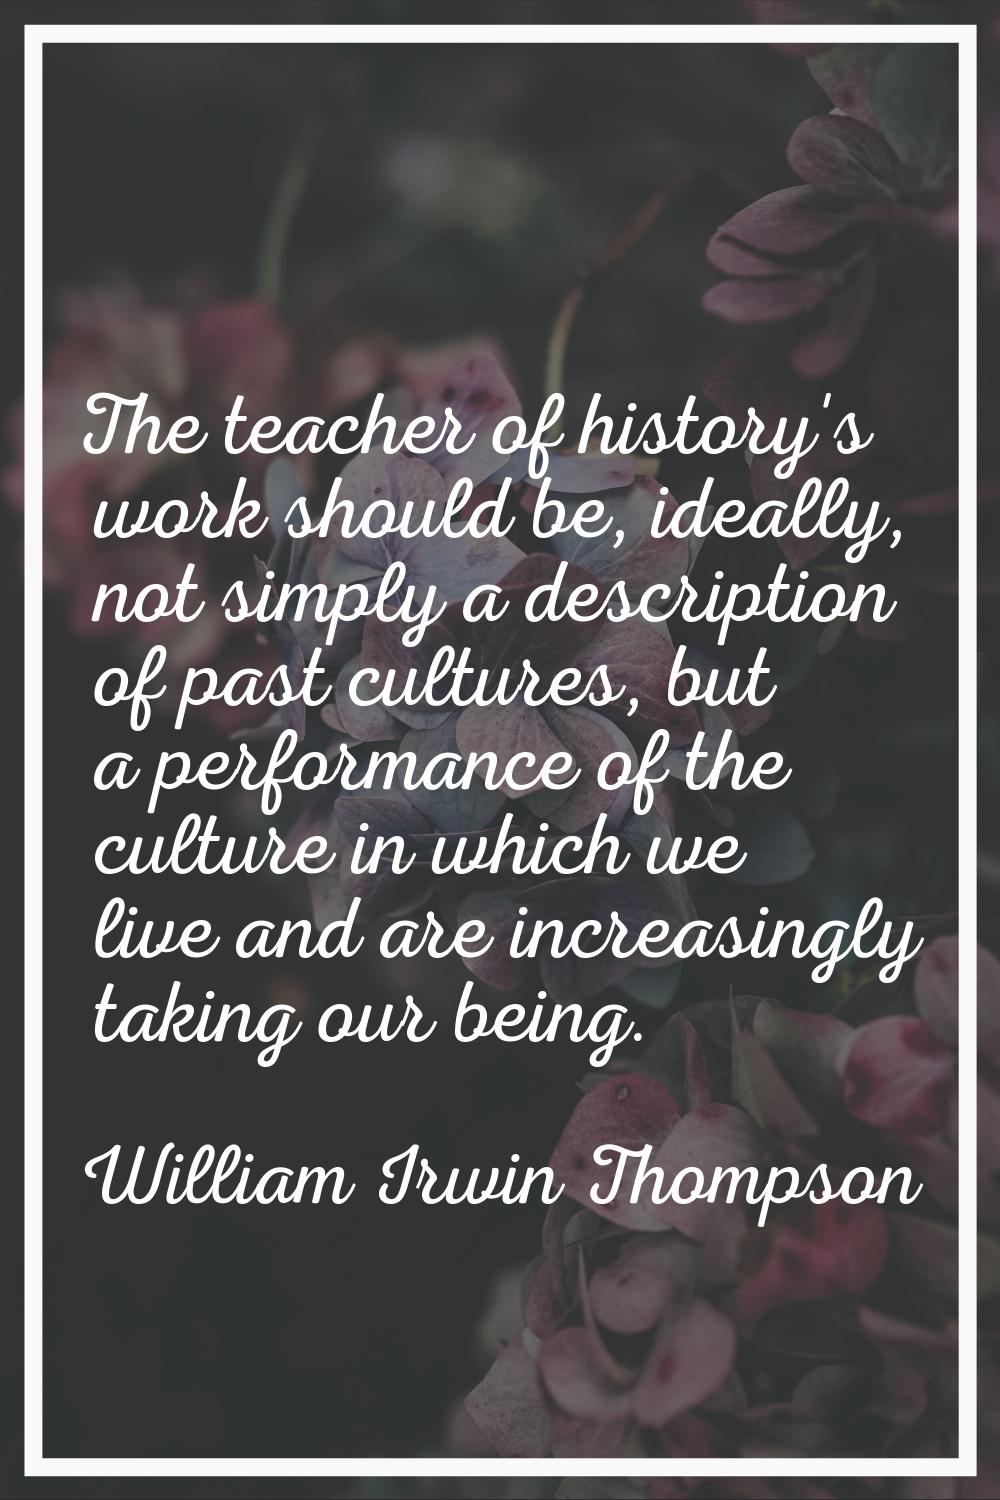 The teacher of history's work should be, ideally, not simply a description of past cultures, but a 